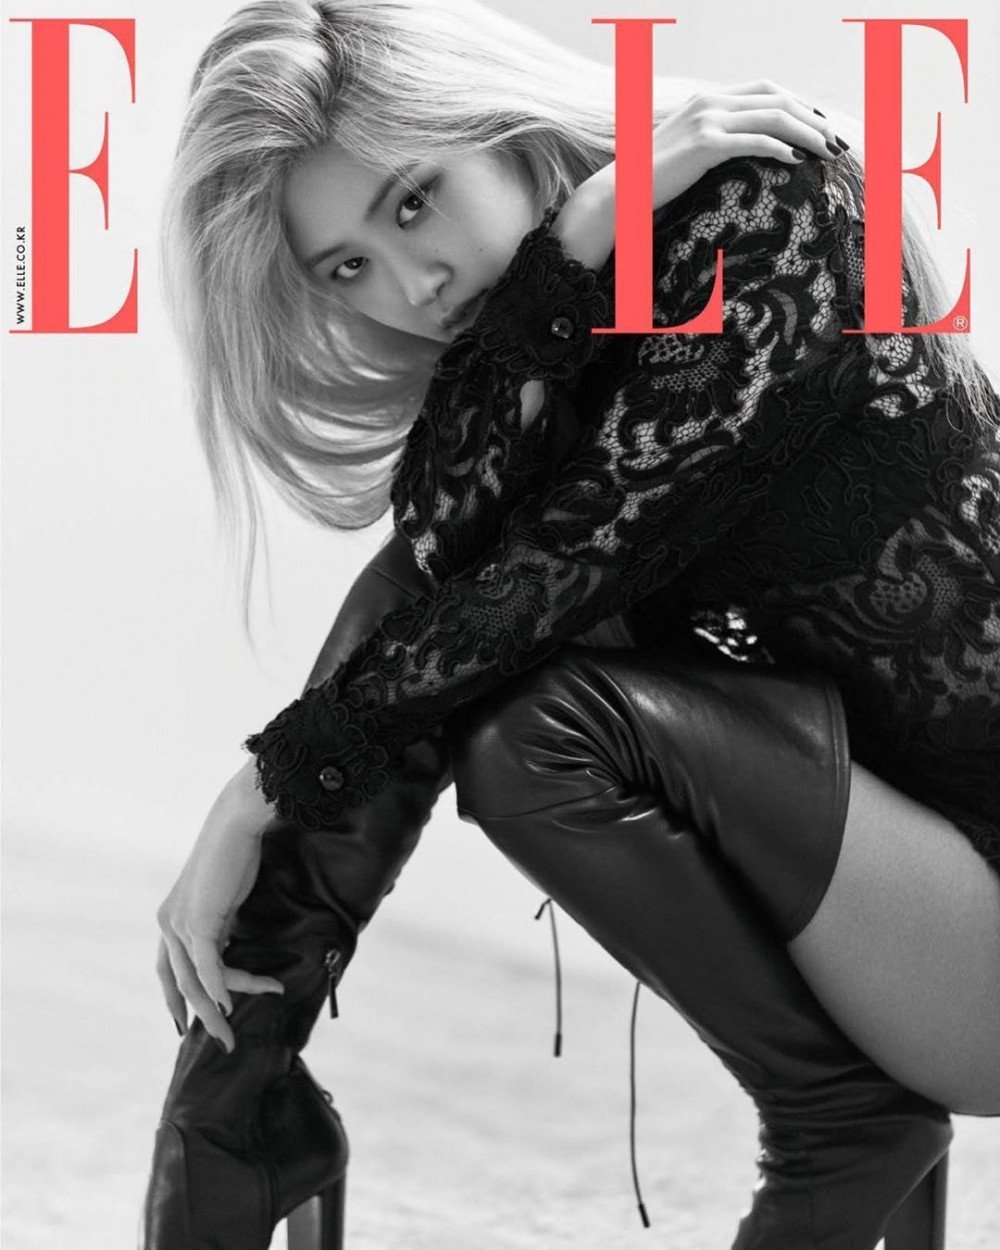 blackpink-rose-interests-fans-by-her-charm-as-the-model-on-the-july-cover-of-elle-4